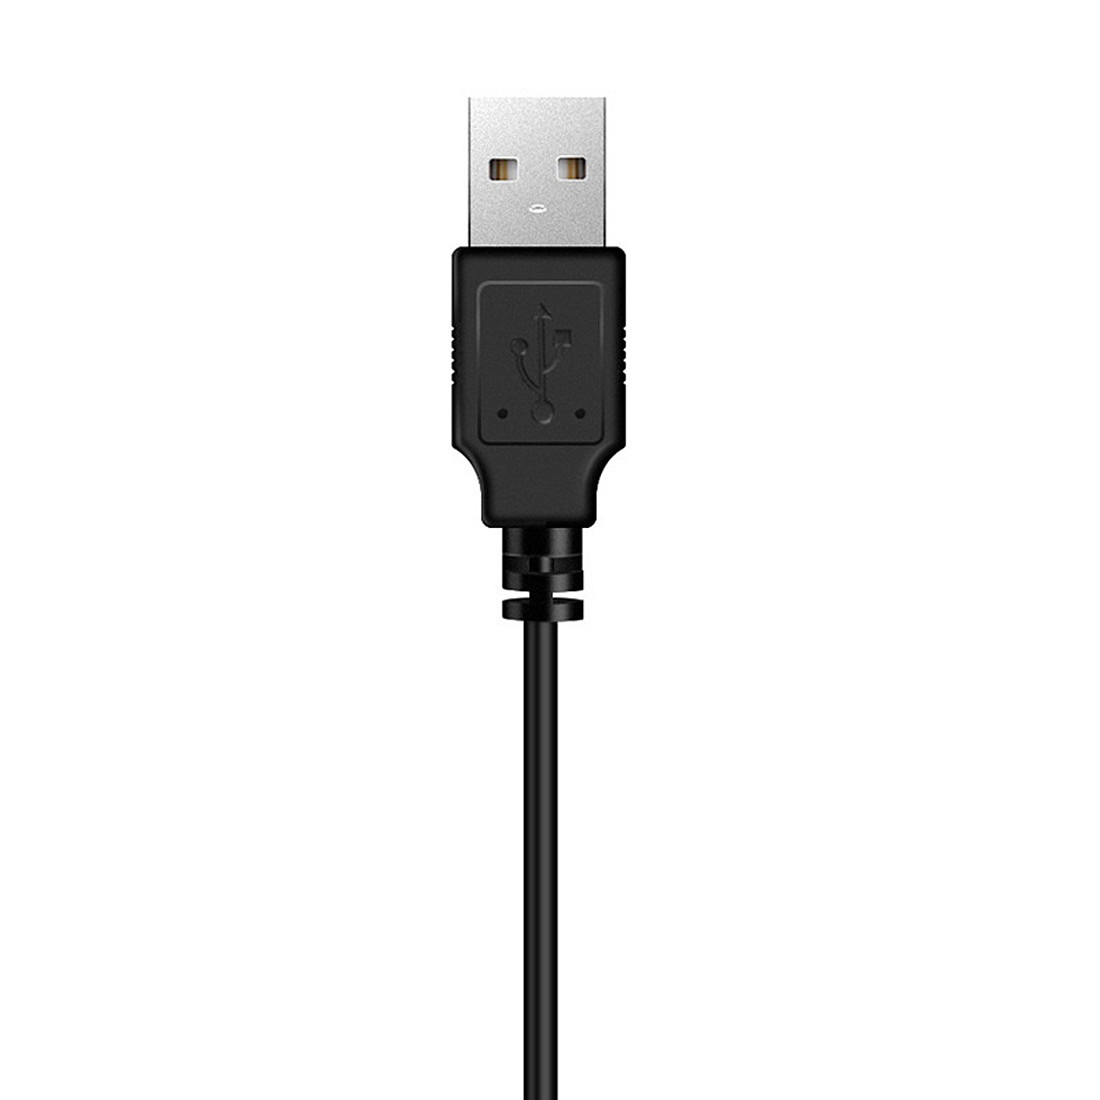 US$ 9.52 - BGNing 95cm USB Charging Cable for DJI OSMO Mobile Handheld ...